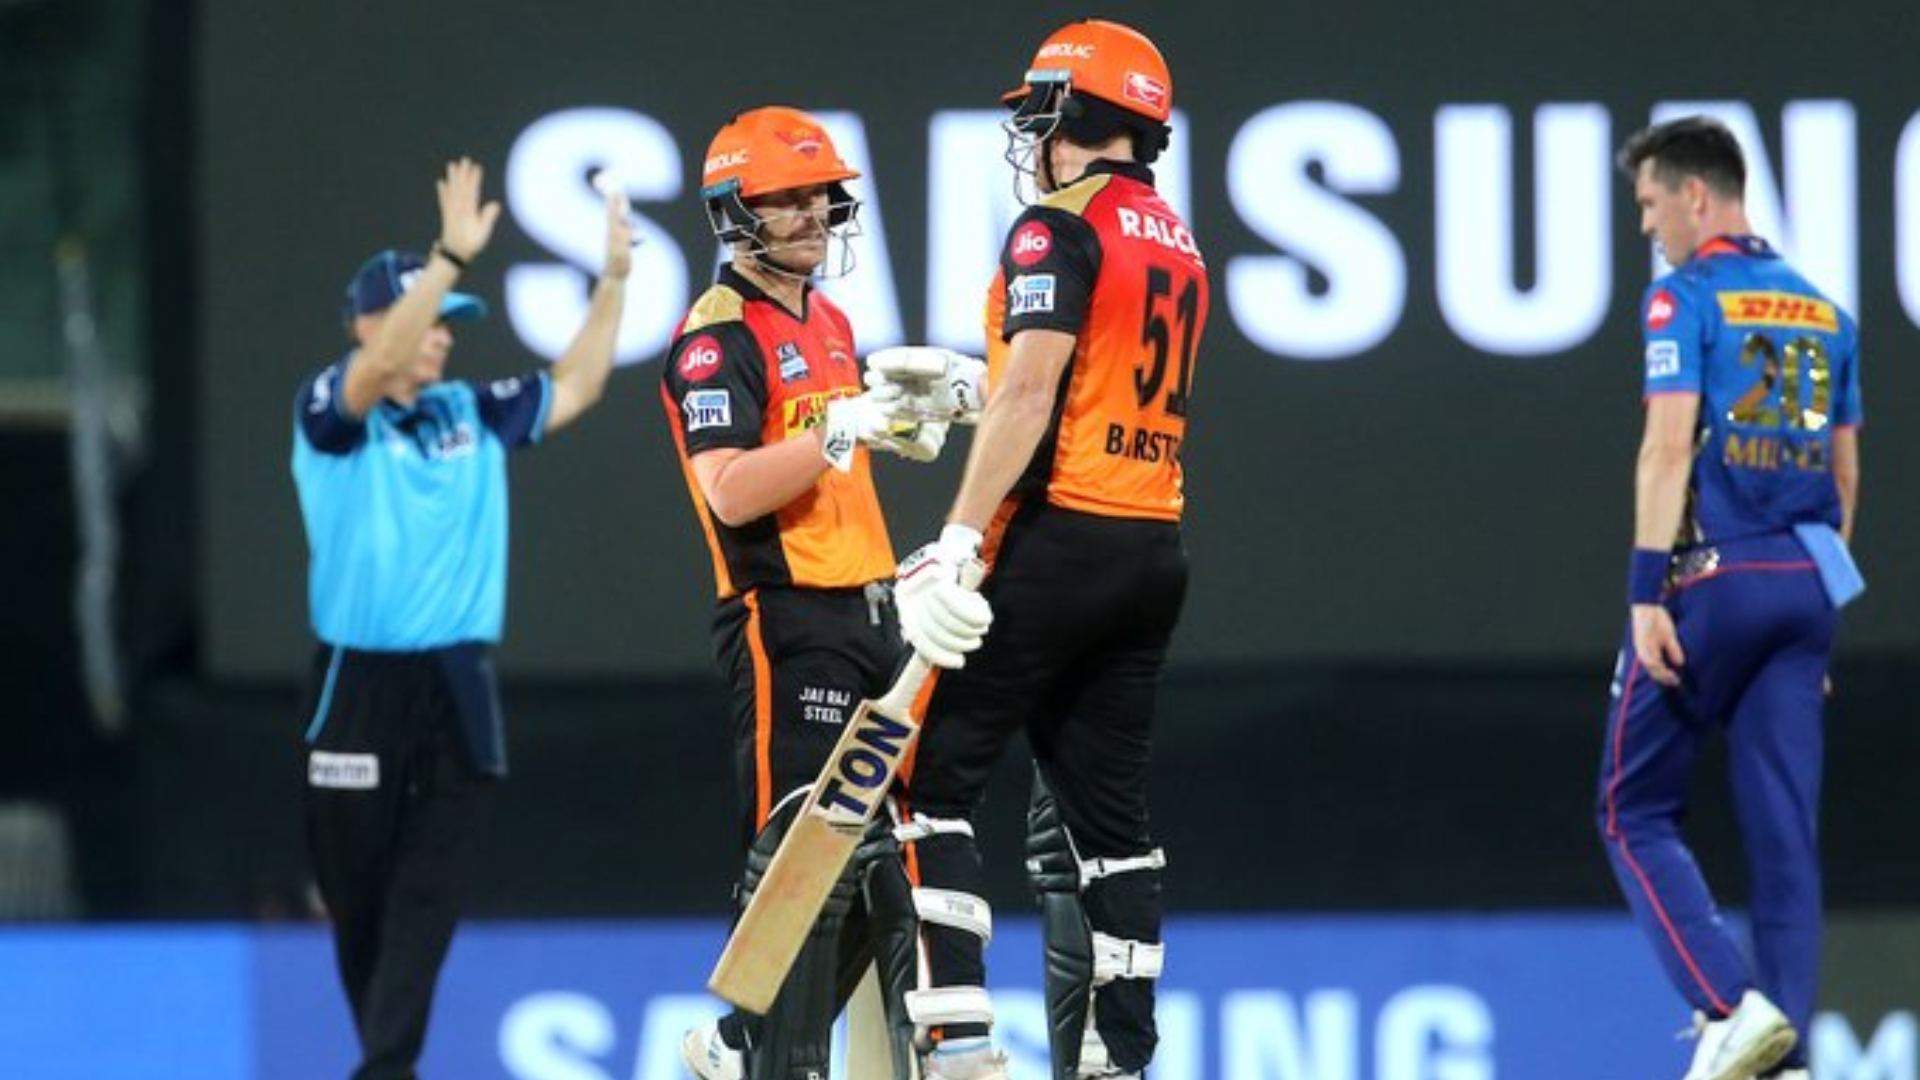 Sunrisers Hyderabad have never won a game in Chennai ever since they entered the IPL in 2013.